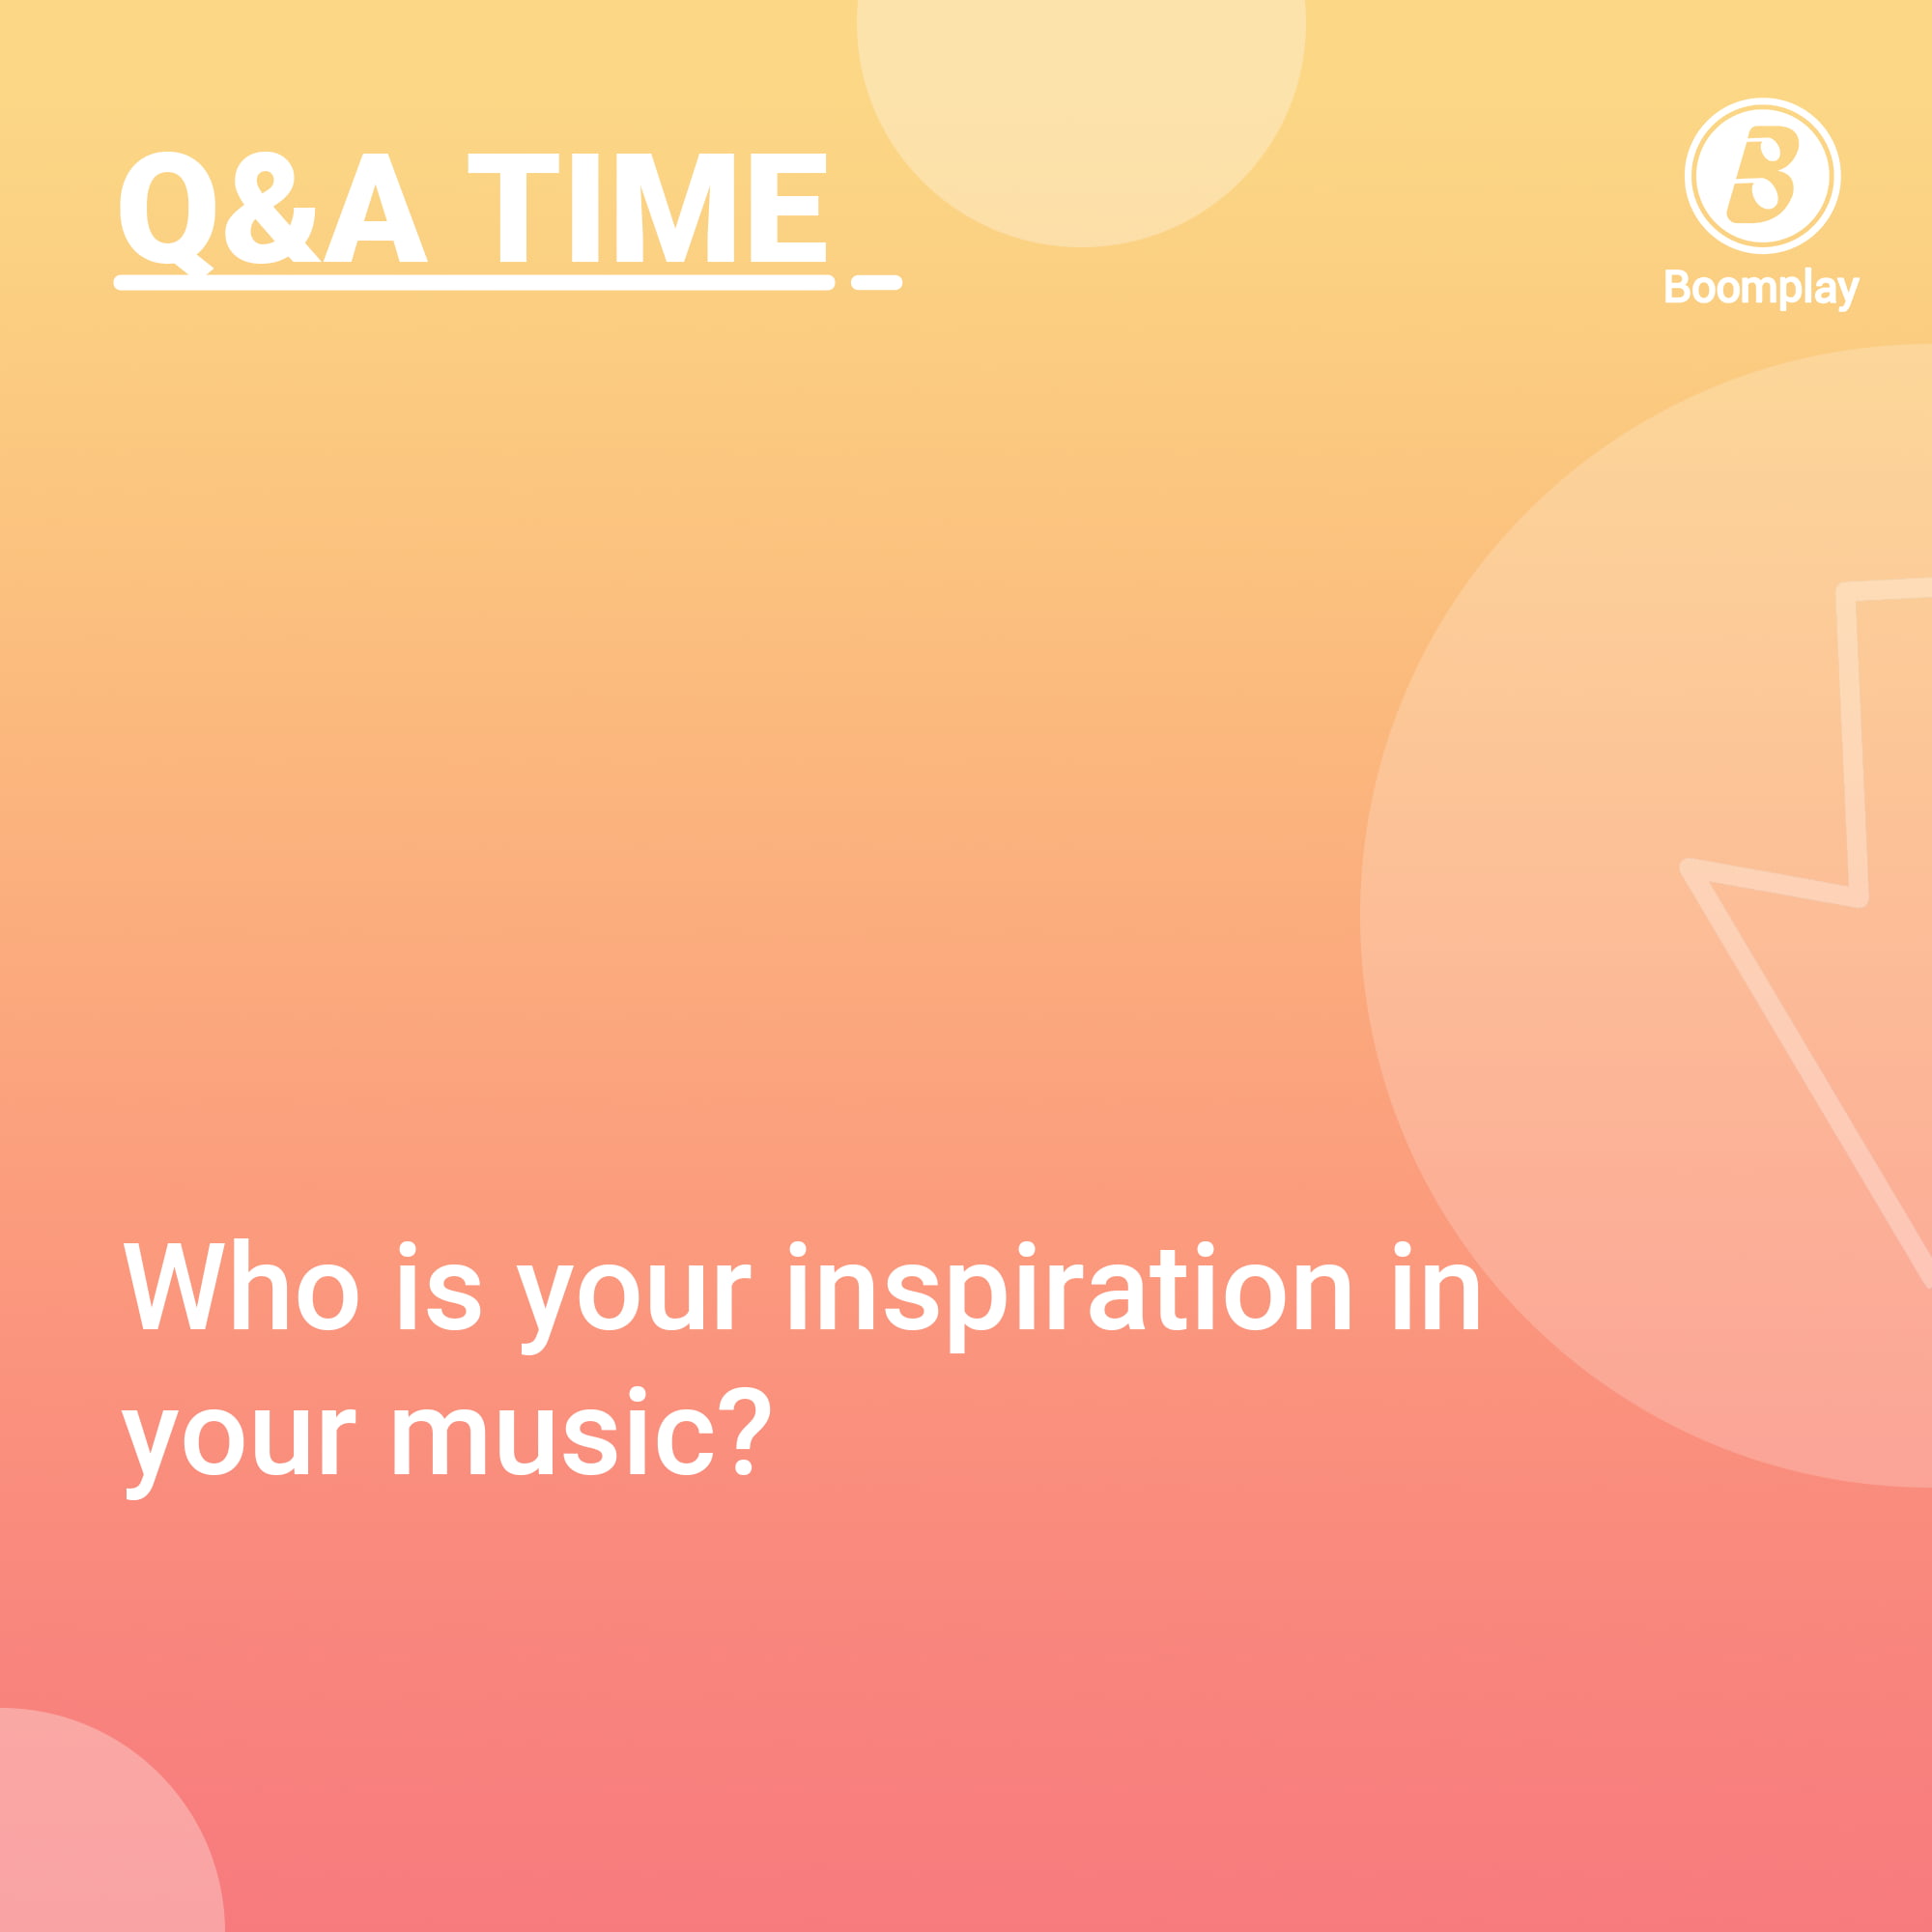 Q&A Time! Who is your inspiration in your music?